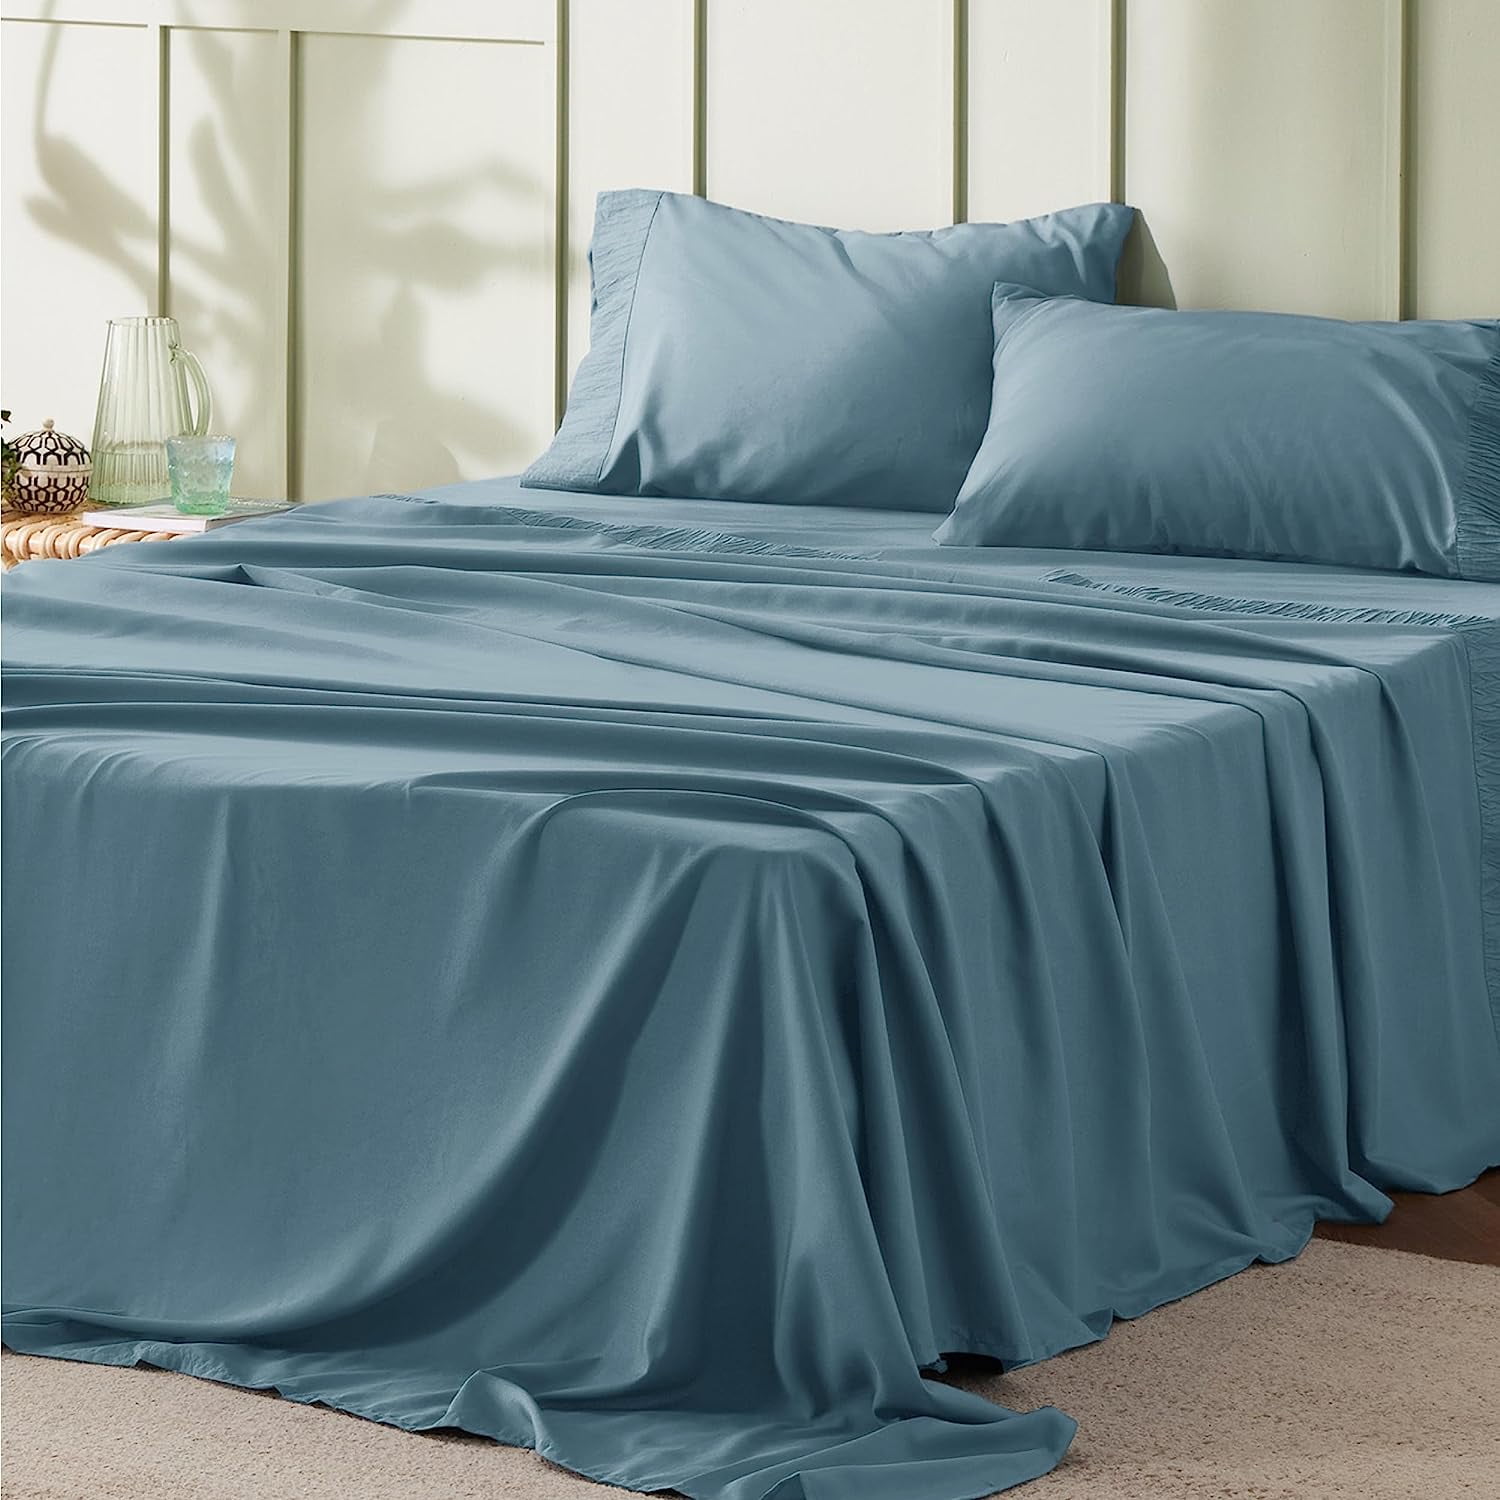 Bedsure 3 Pieces Hotel Luxury Grey Blue Sheets Twin，Easy Care